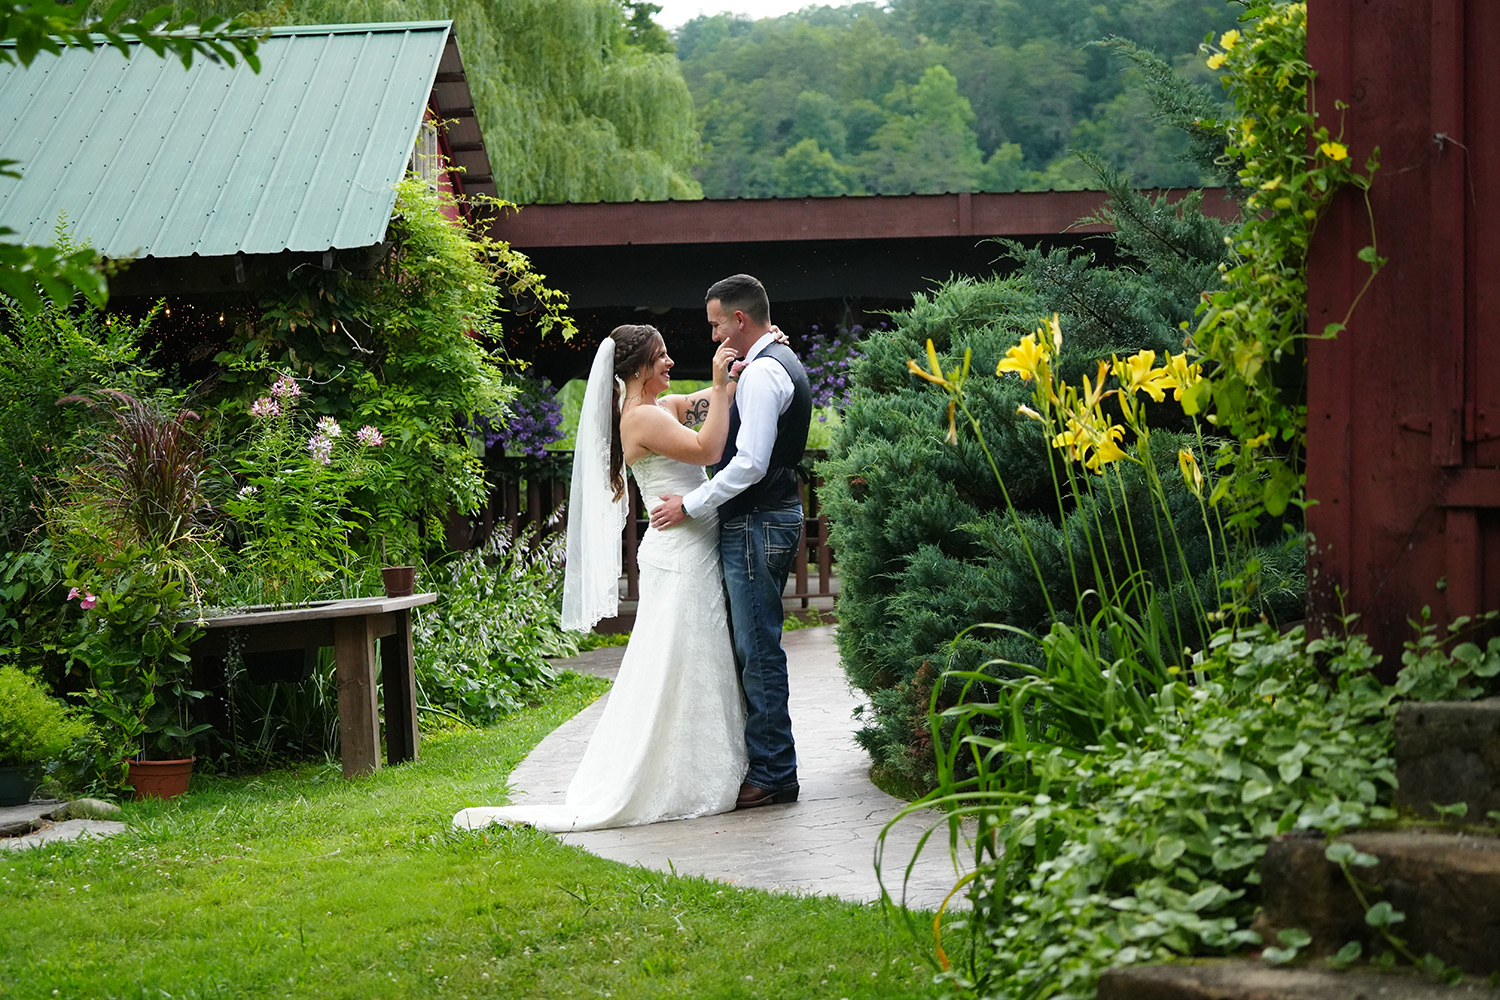 Wedding couple holding each other in a country garden by a rustic pavilion at Honeysuckle Hills in Pigeon Forge